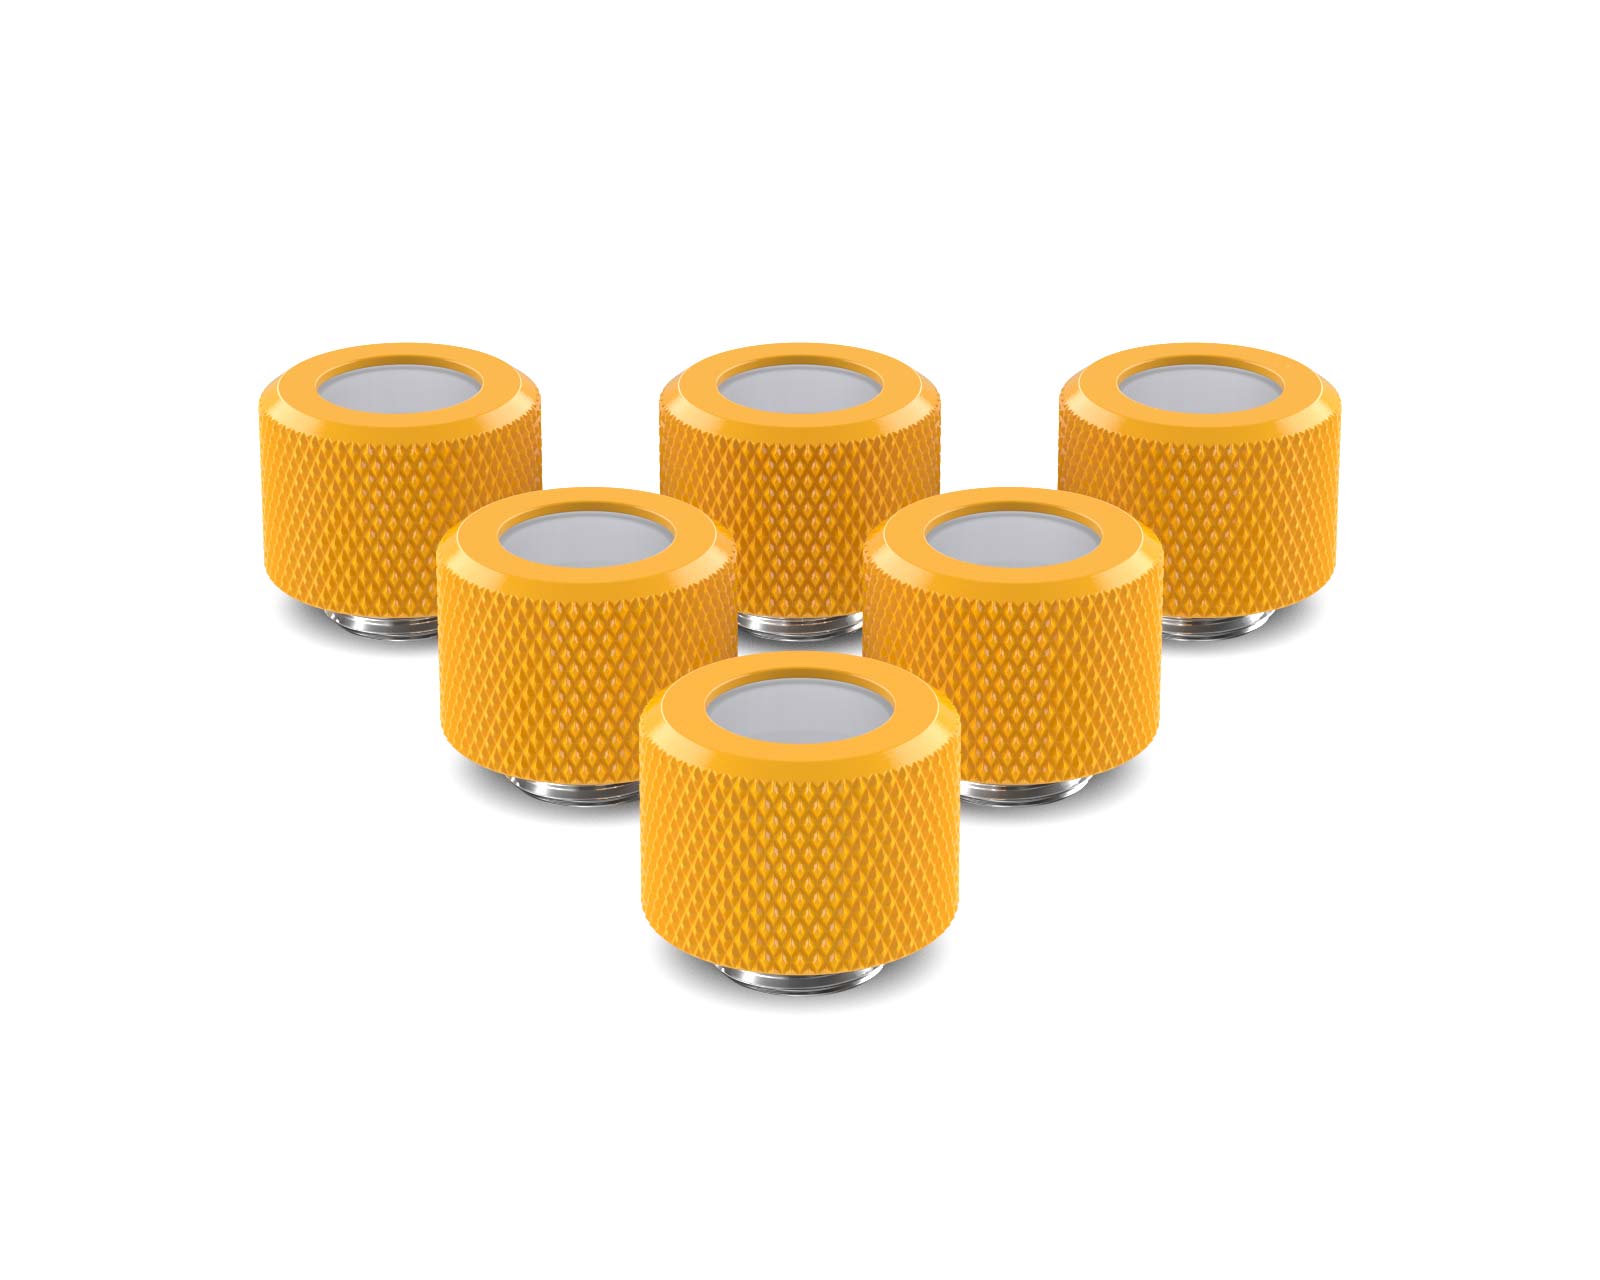 PrimoChill 12mm OD Rigid SX Fitting - 6 Pack - PrimoChill - KEEPING IT COOL Yellow